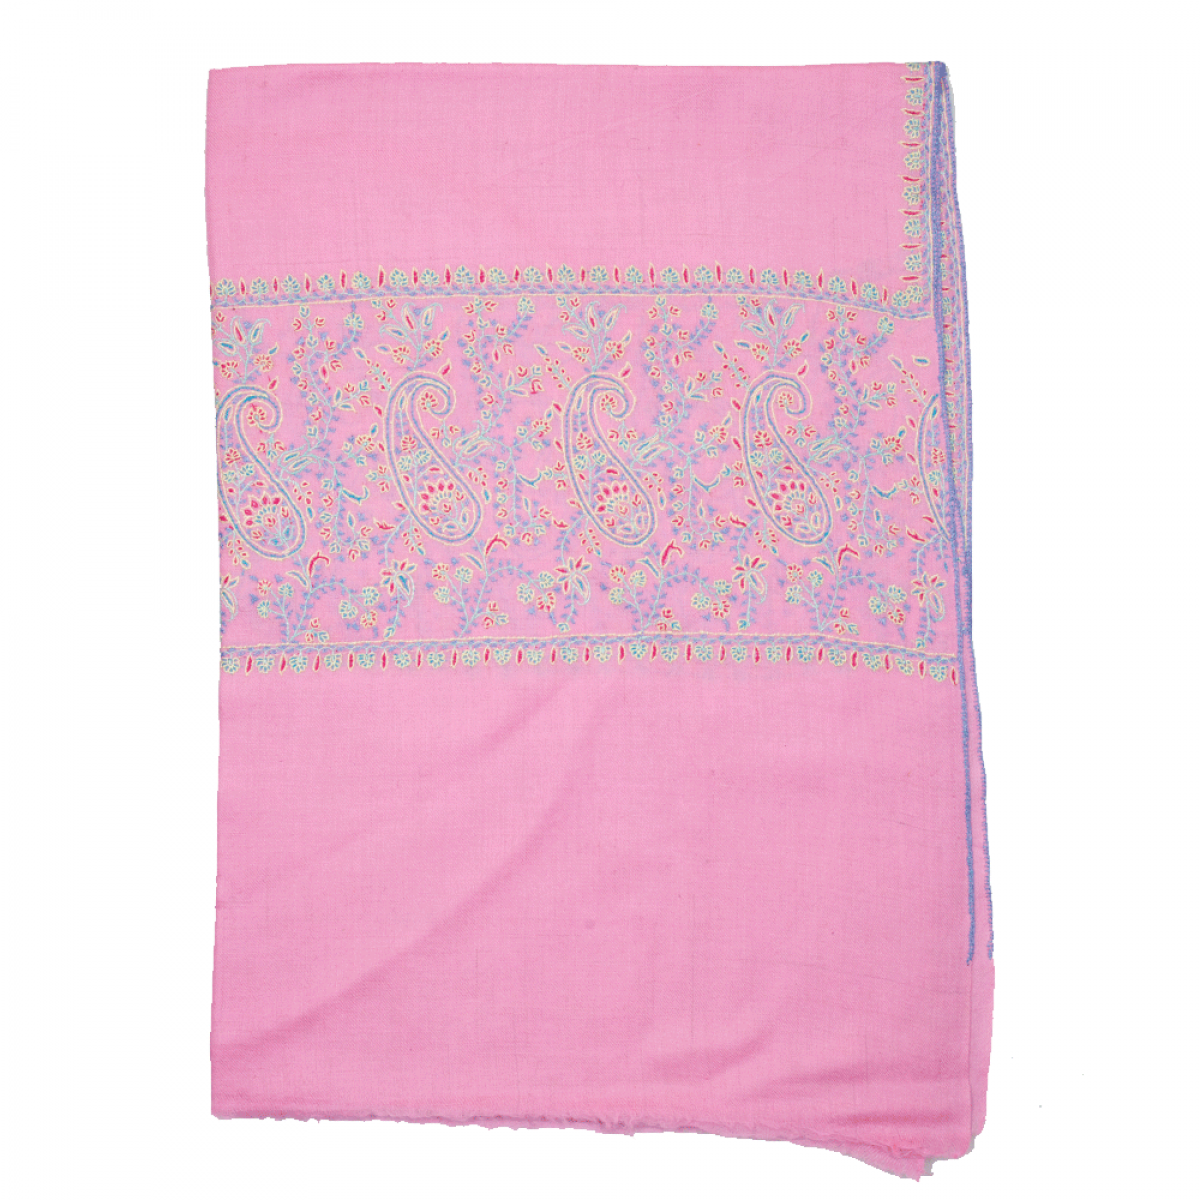 Embroidered Pashmina Stole - Barbie Pink & Blue